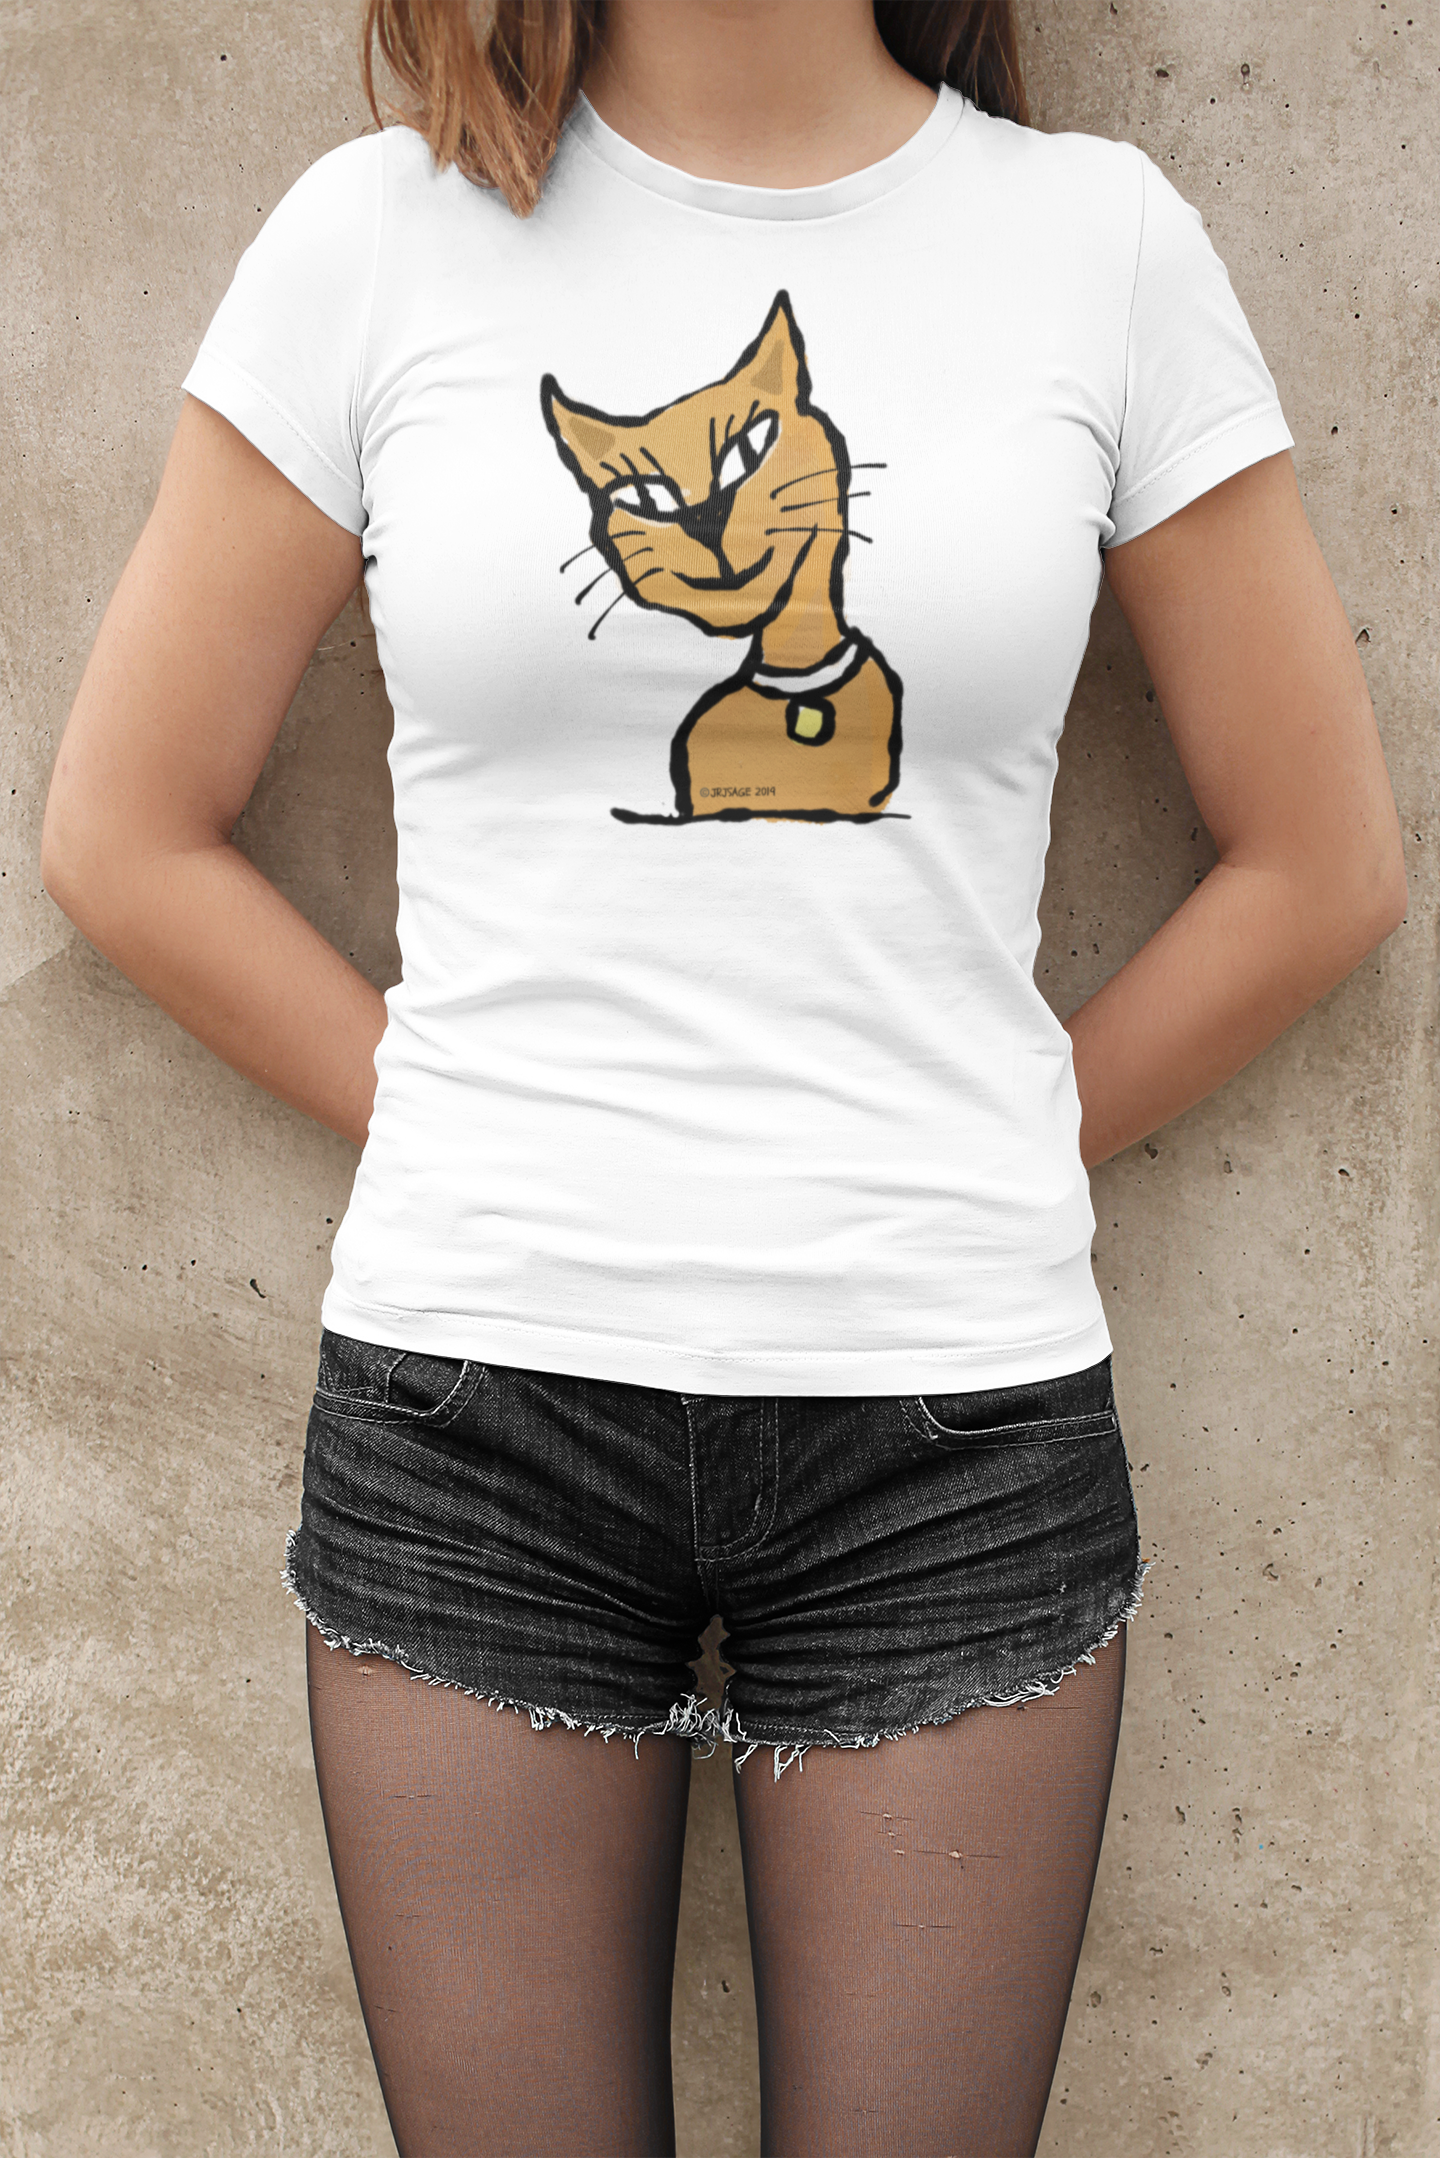 Ginger Cat T-shirt - Young woman wearing an Illustrated white colour vegan cotton Cat T-shirt by Hector and Bone